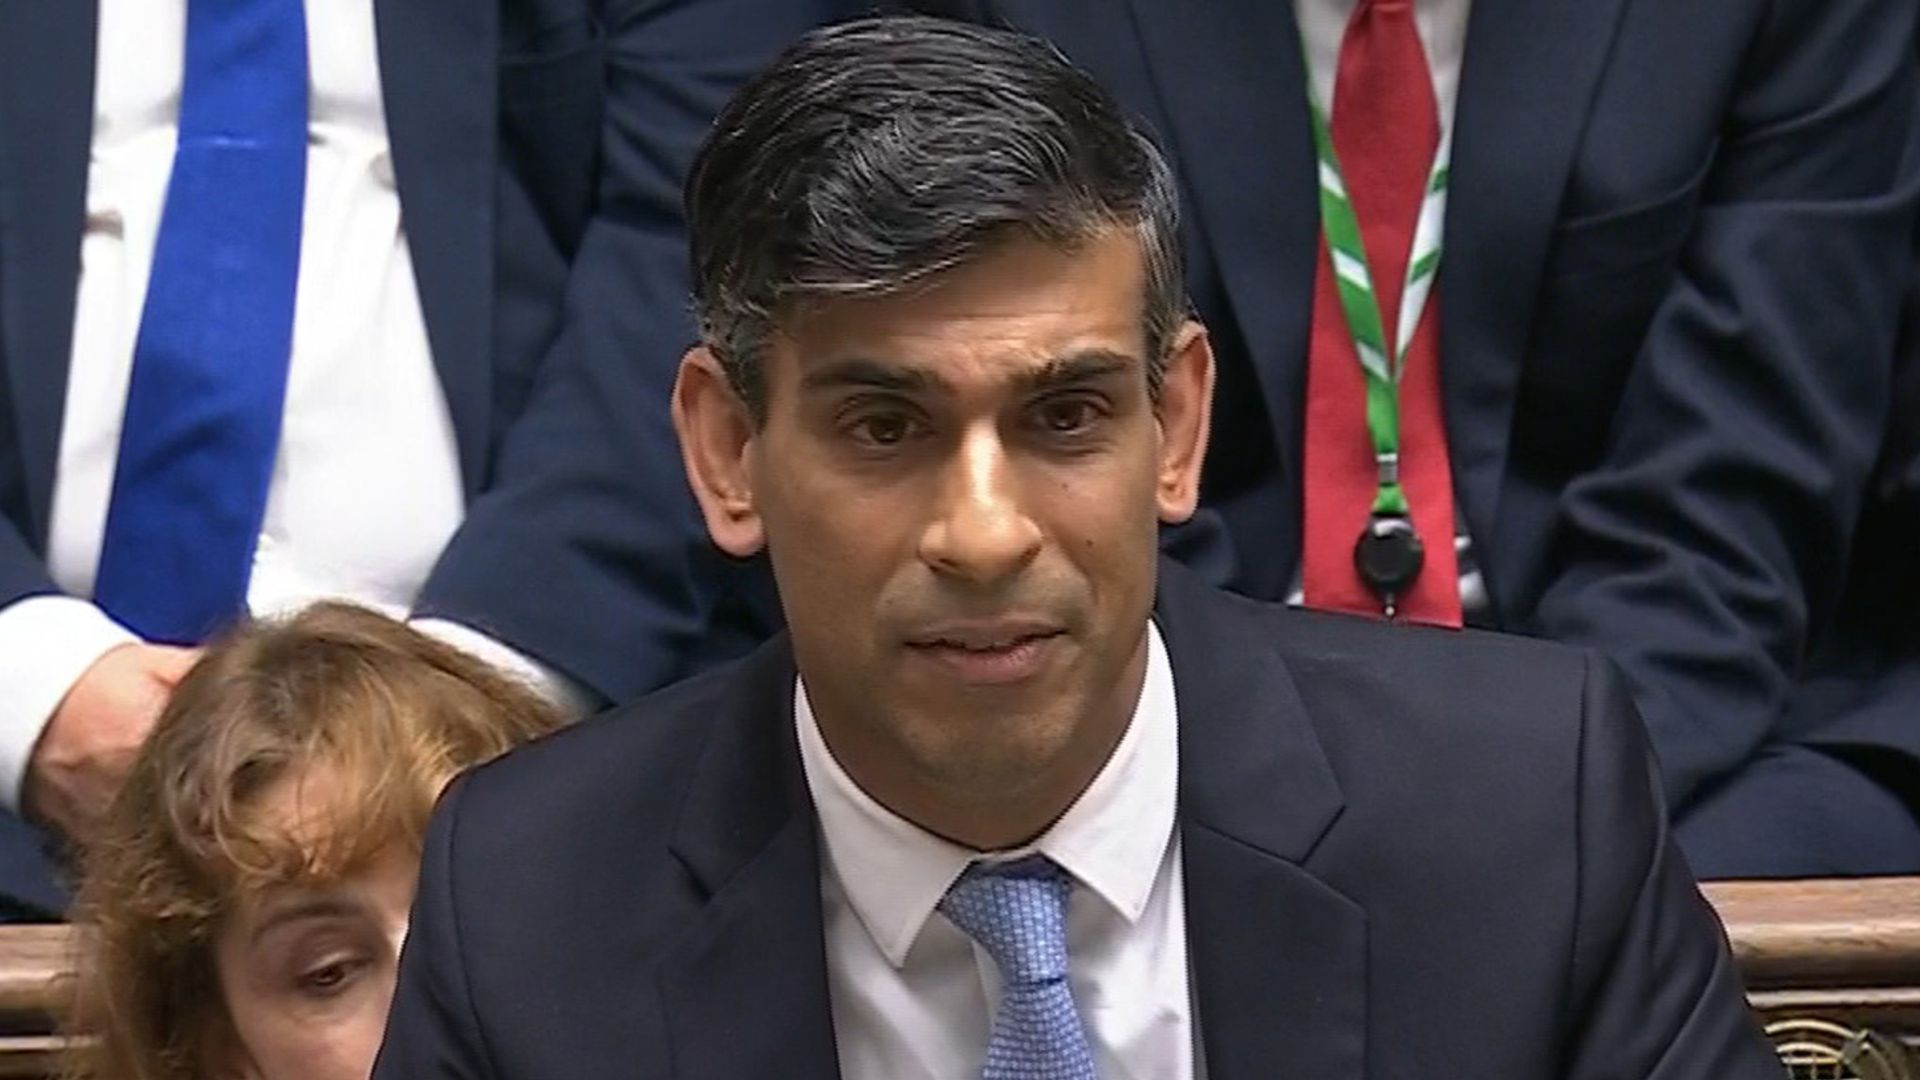 Sunak apologises to Tory MPs eight times at party 'wake'